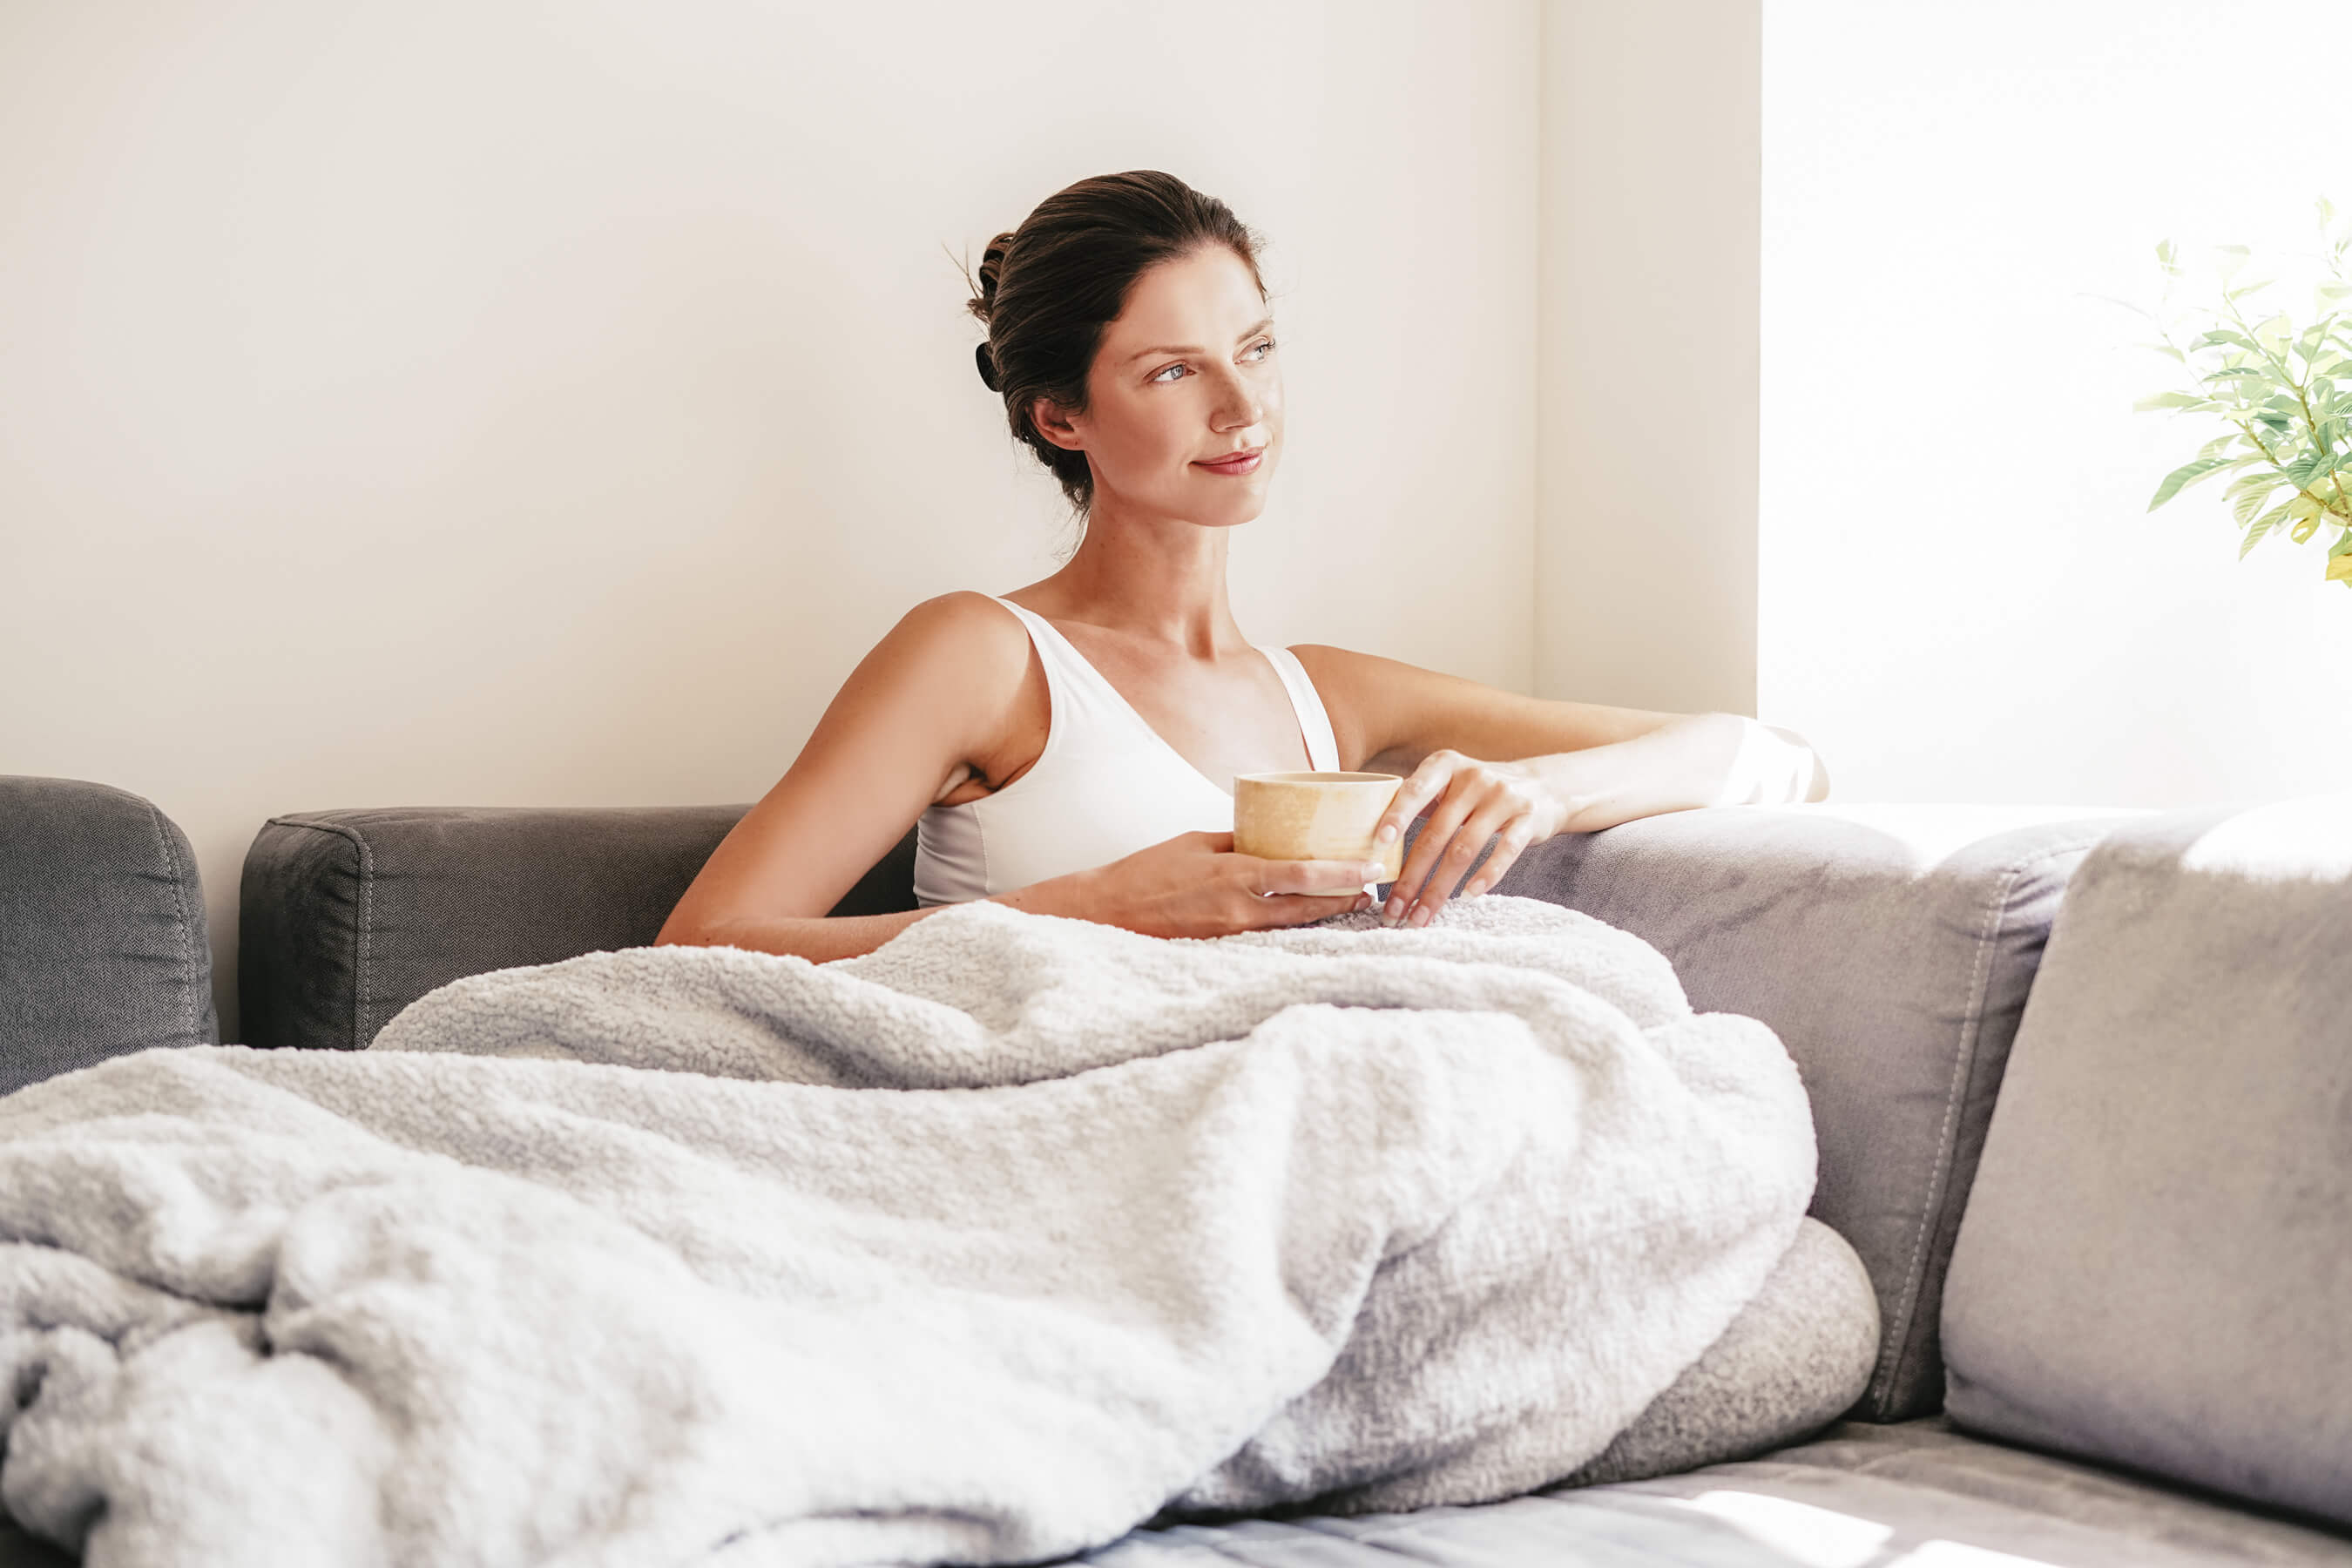 Woman sitting on the couch with a weighted blanket. Sunday Citizen Snug Crystal Weighted Blanket. Woman relaxing with weighted blanket.